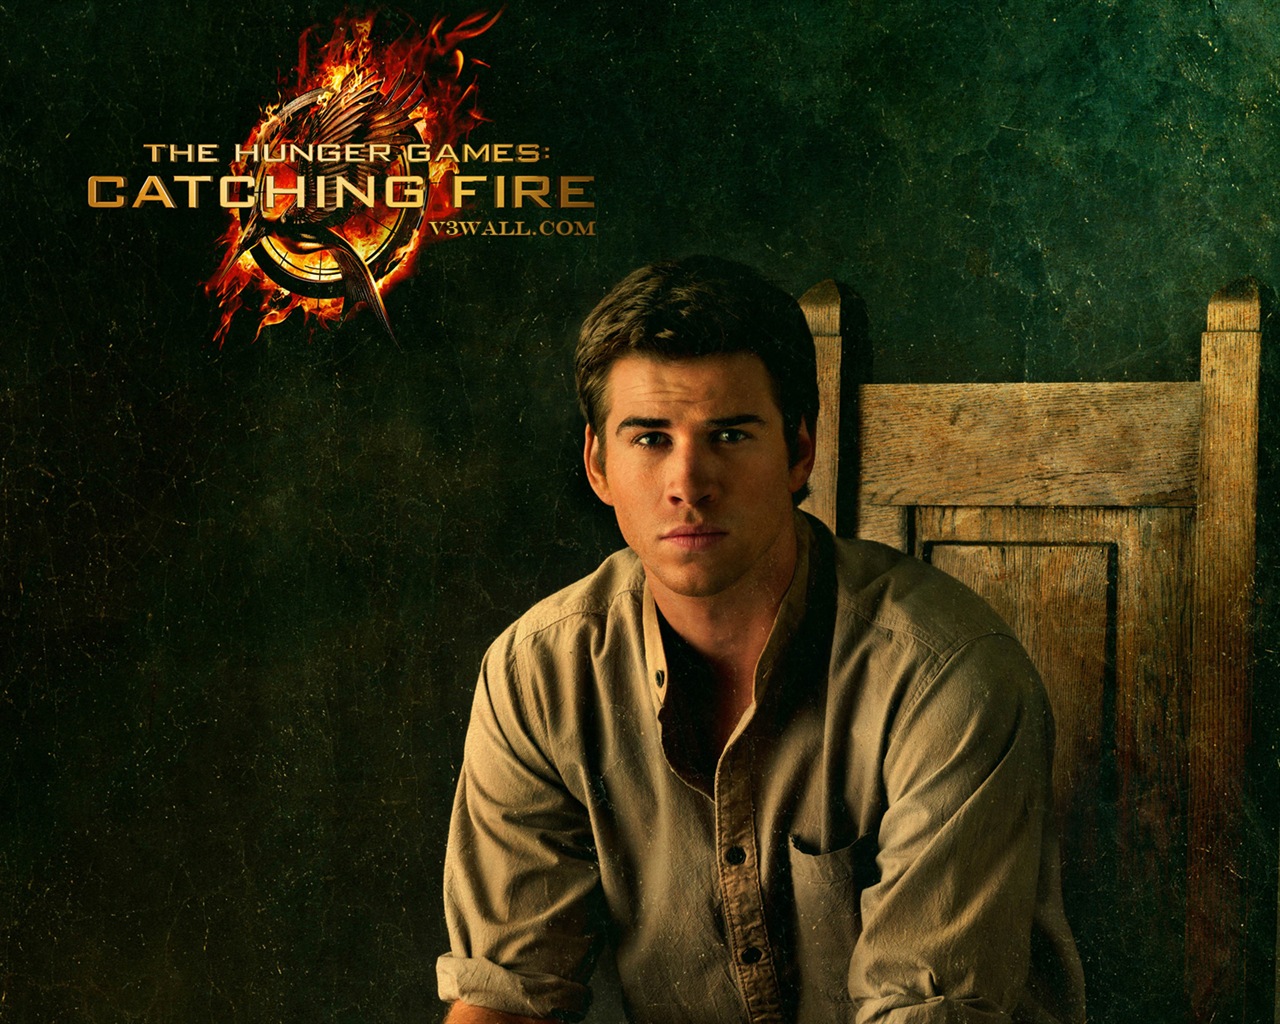 The Hunger Games: Catching Fire wallpapers HD #9 - 1280x1024